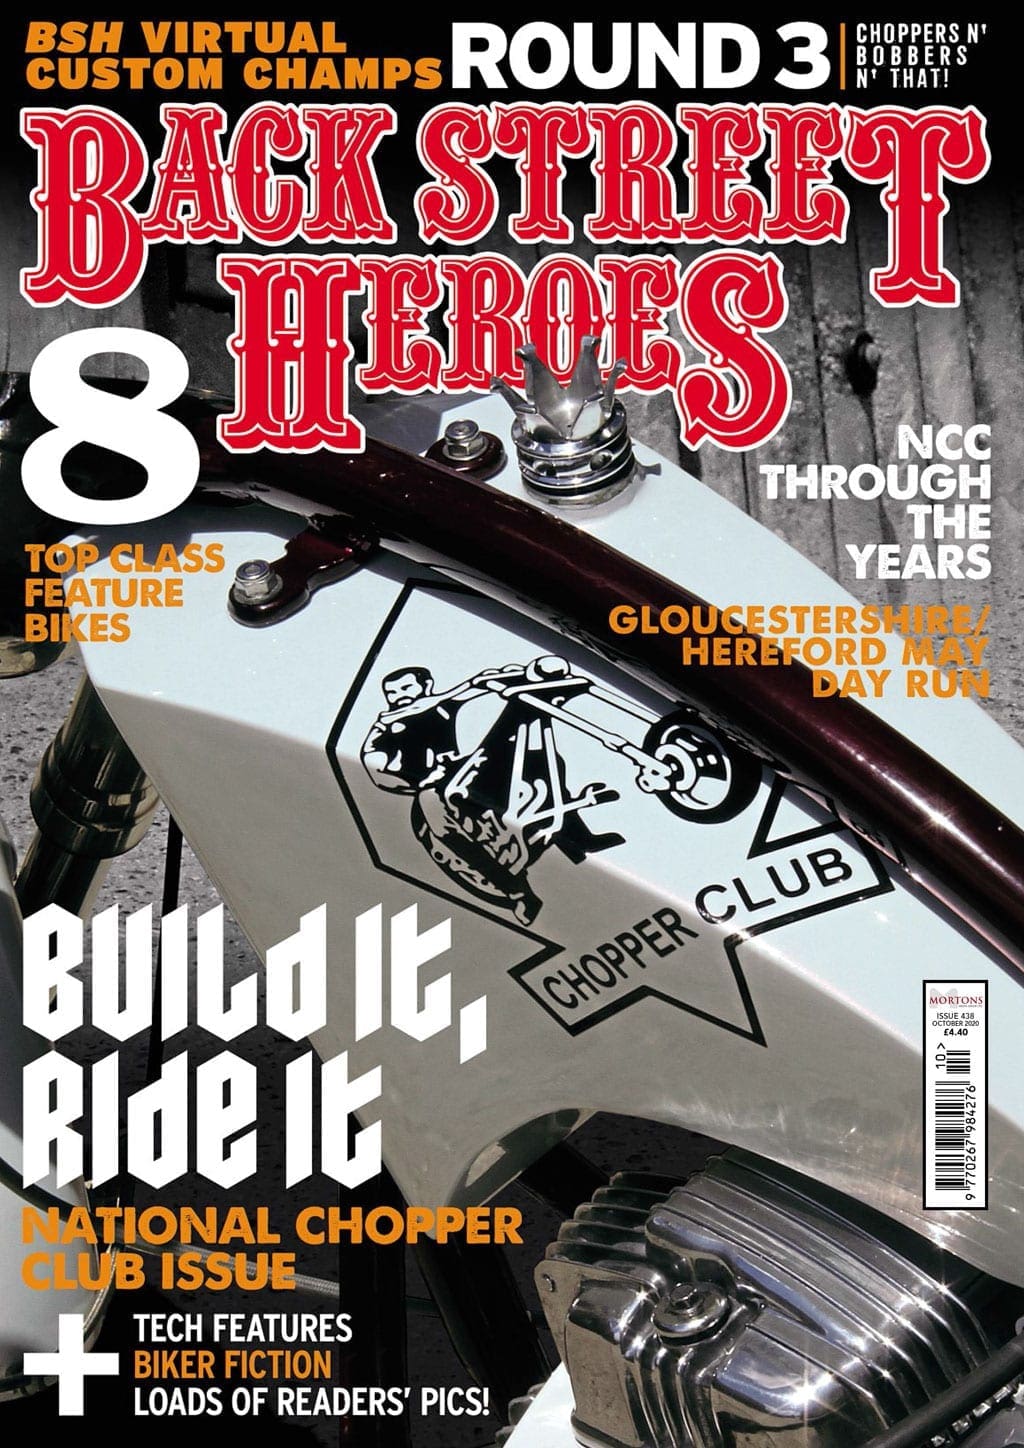 PREVIEW: October issue of Back Street Heroes